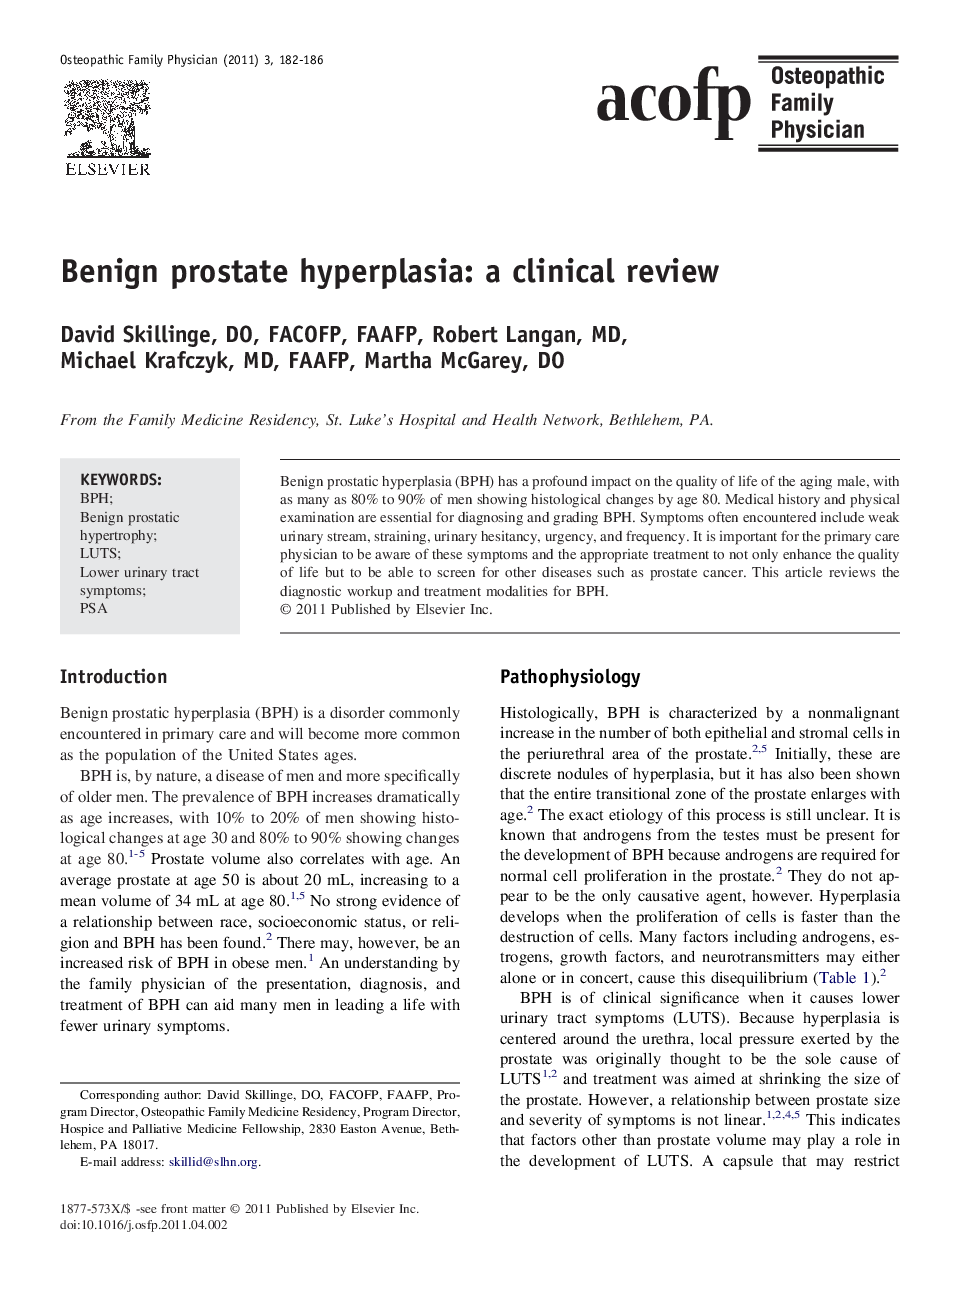 Benign prostate hyperplasia: a clinical review